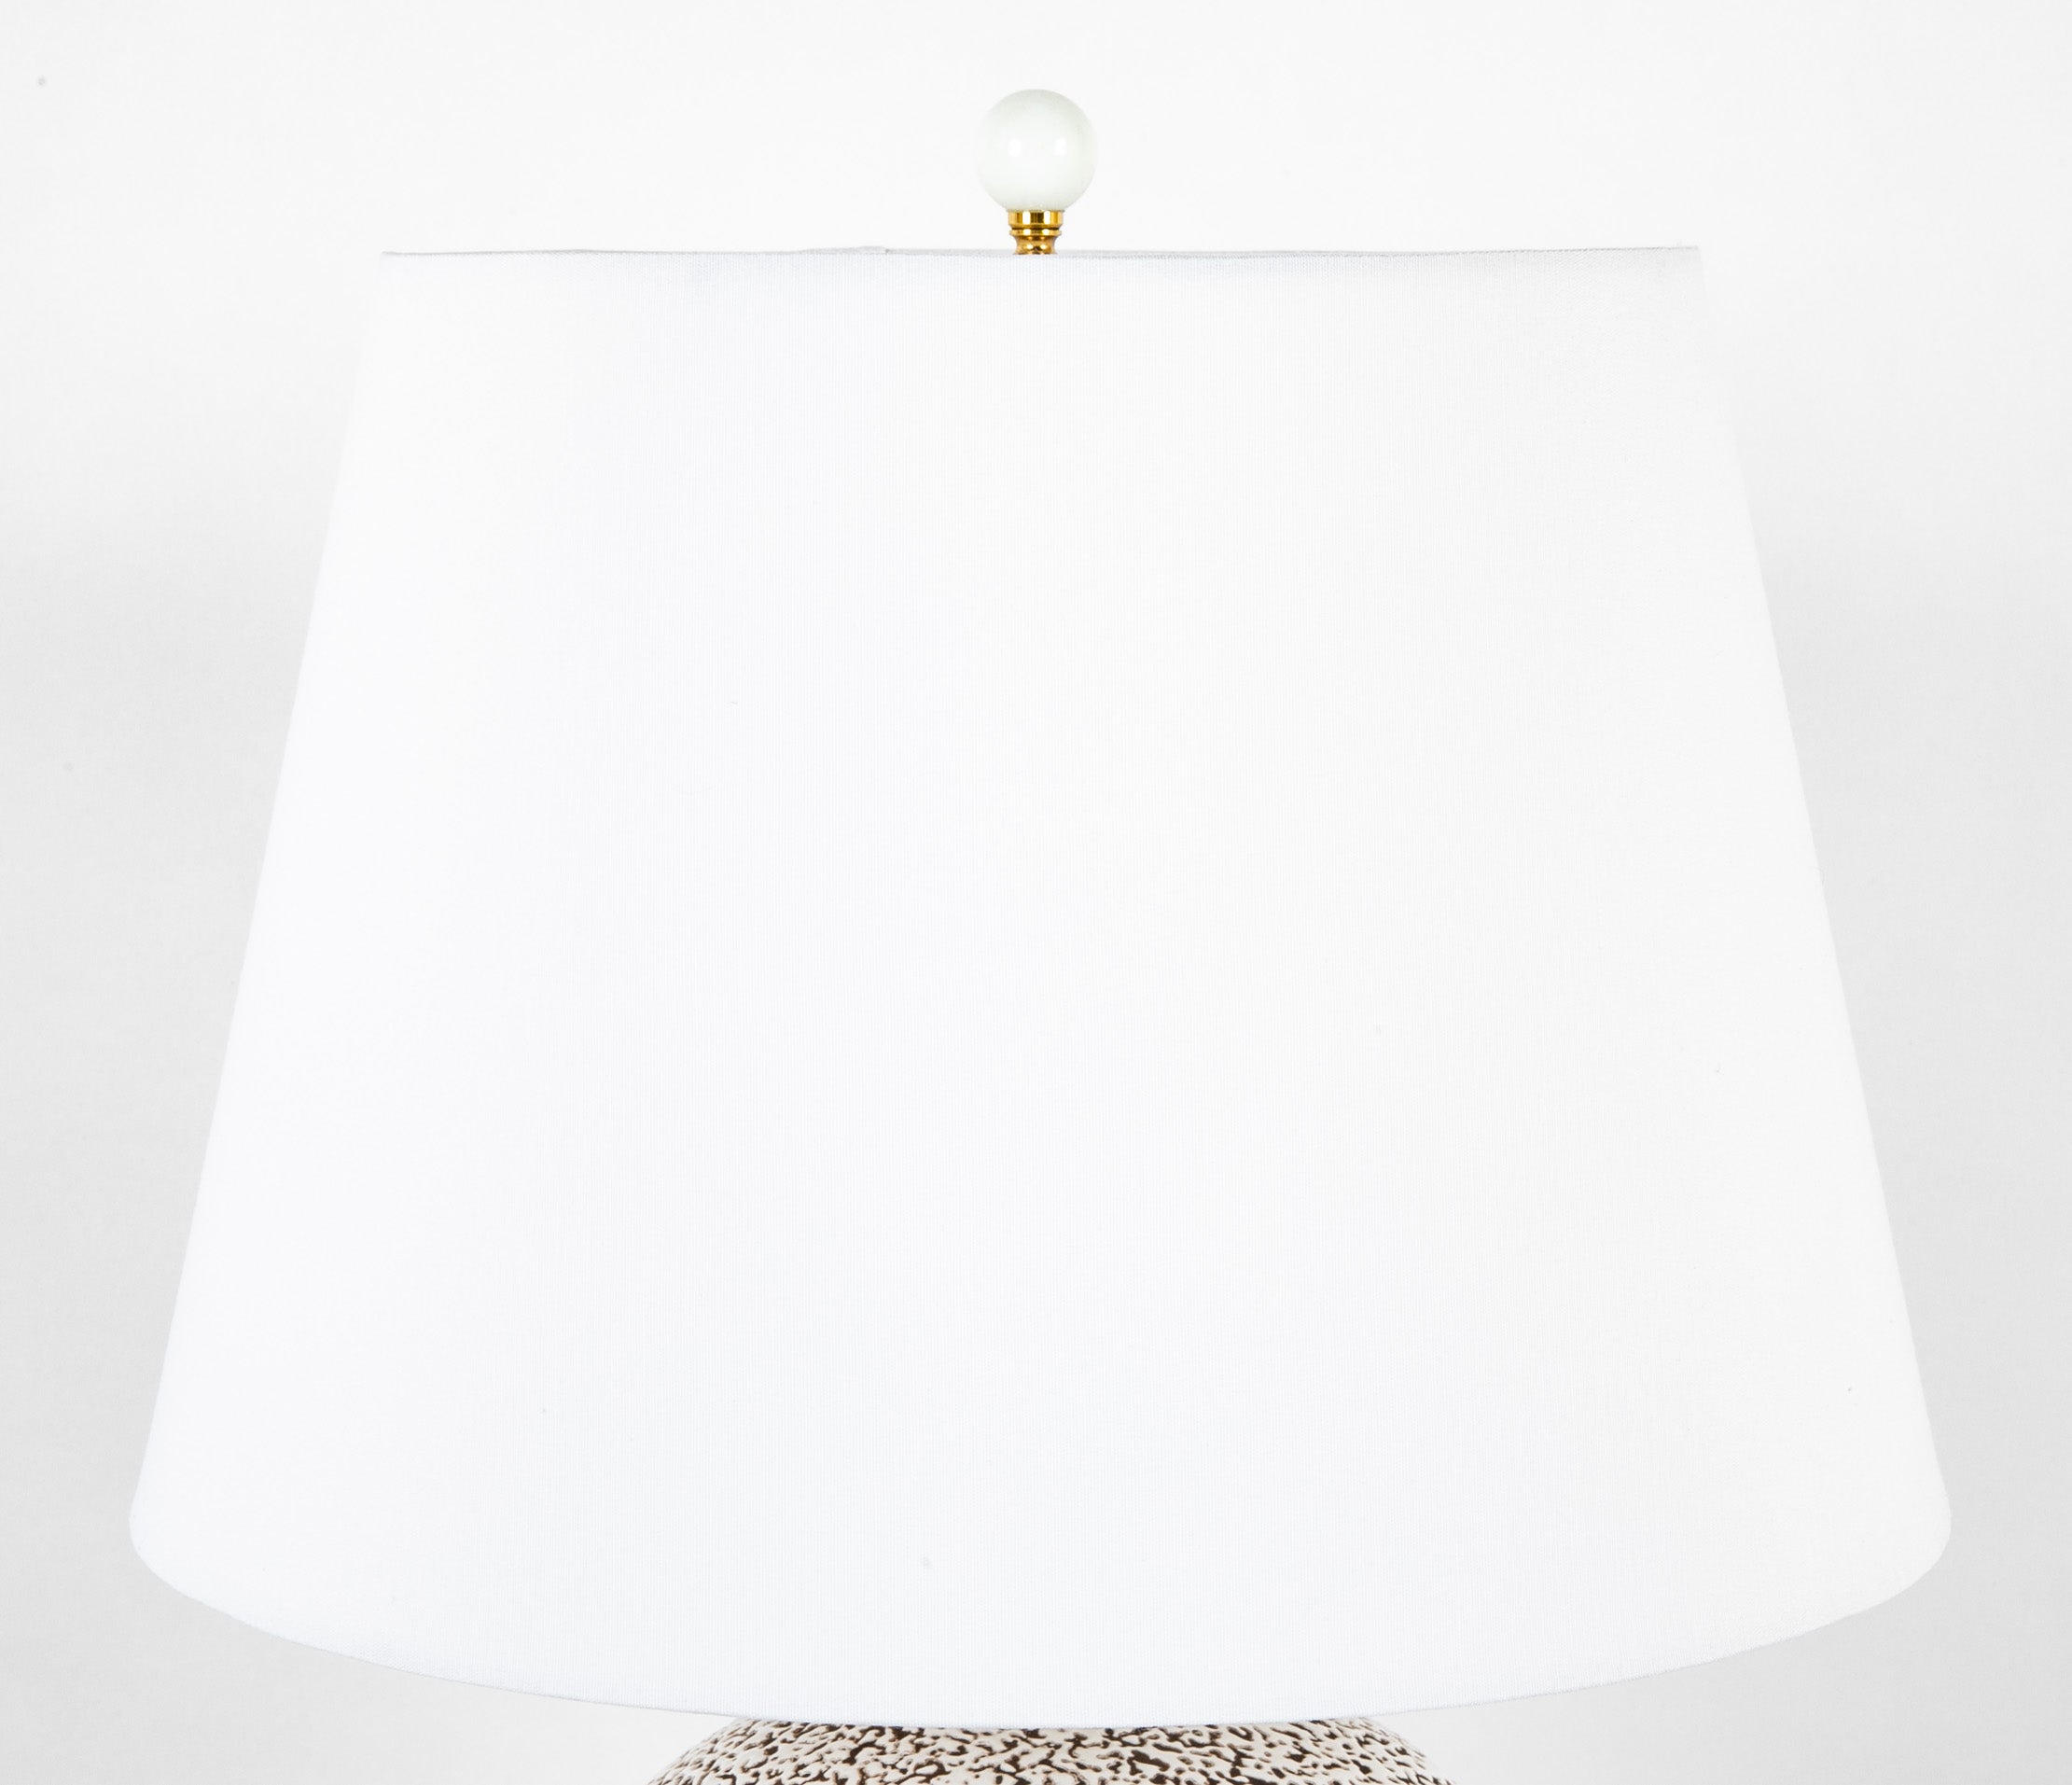 Ceramic Lamp with White Glaze Over Brown in the Style of Jean Besnard